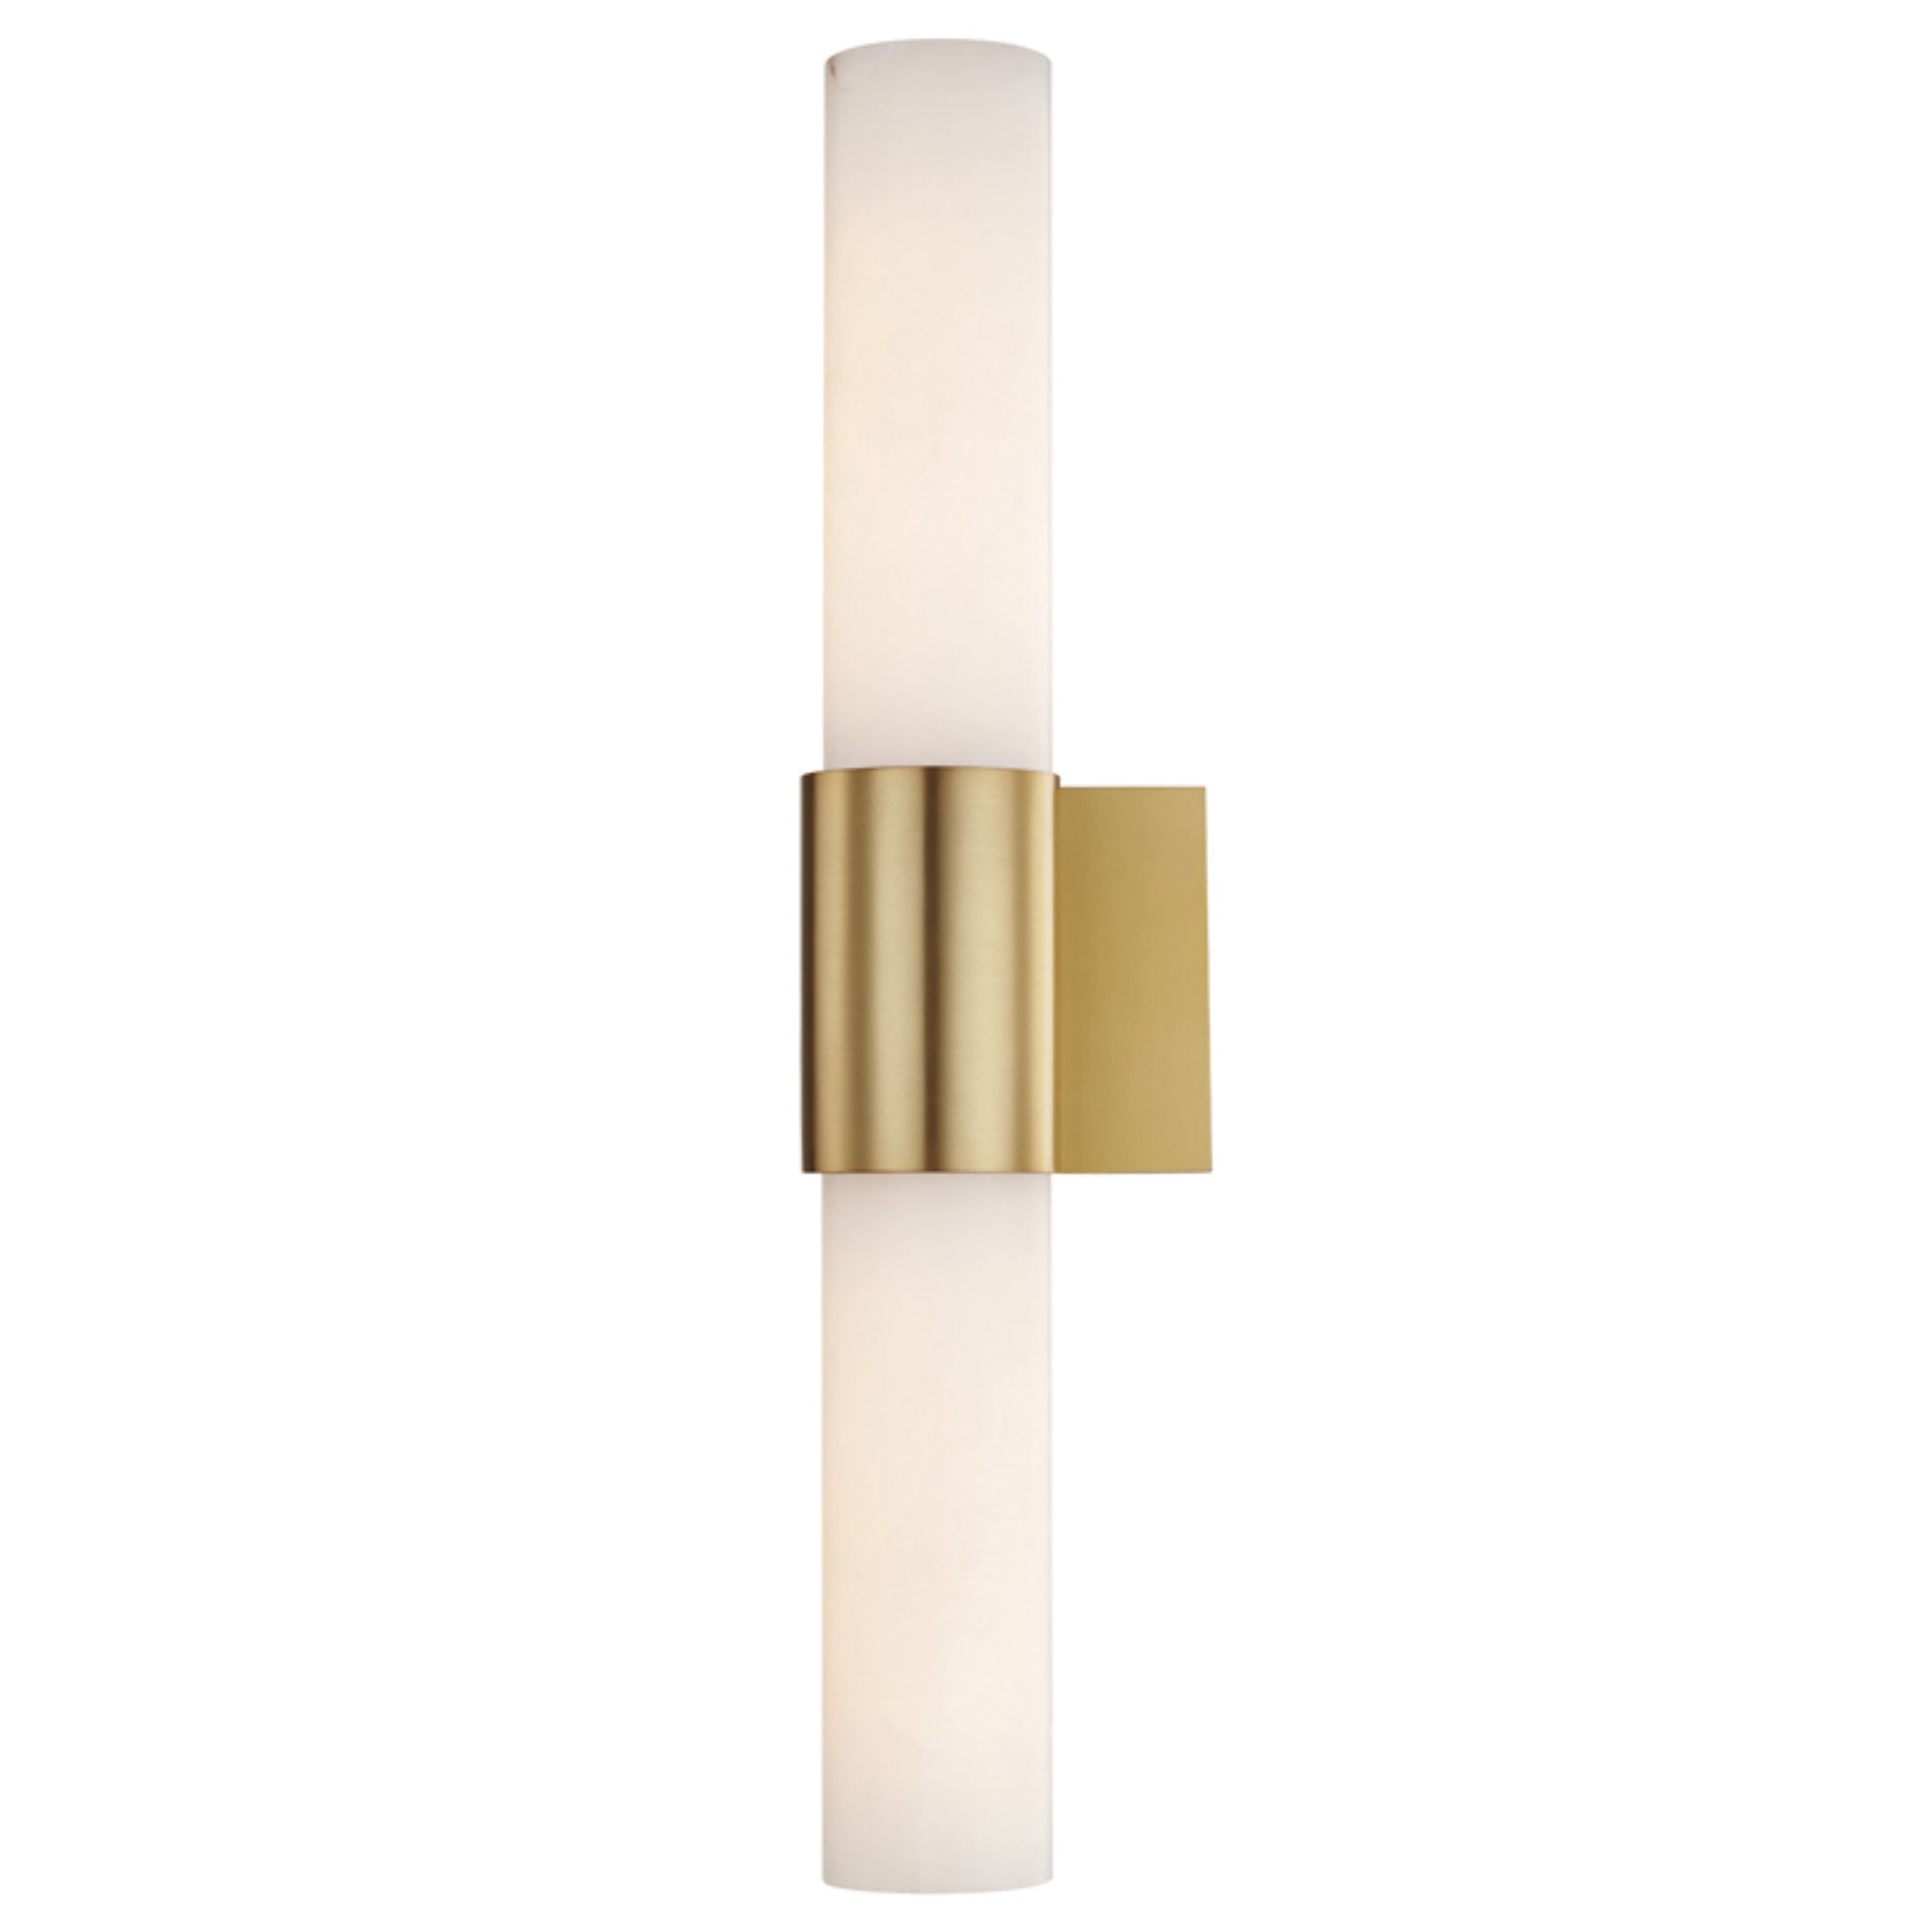 Hudson Valley Lighting 8210-AGB Barkley 2 Light Wall Sconce in Aged Brass Open Box